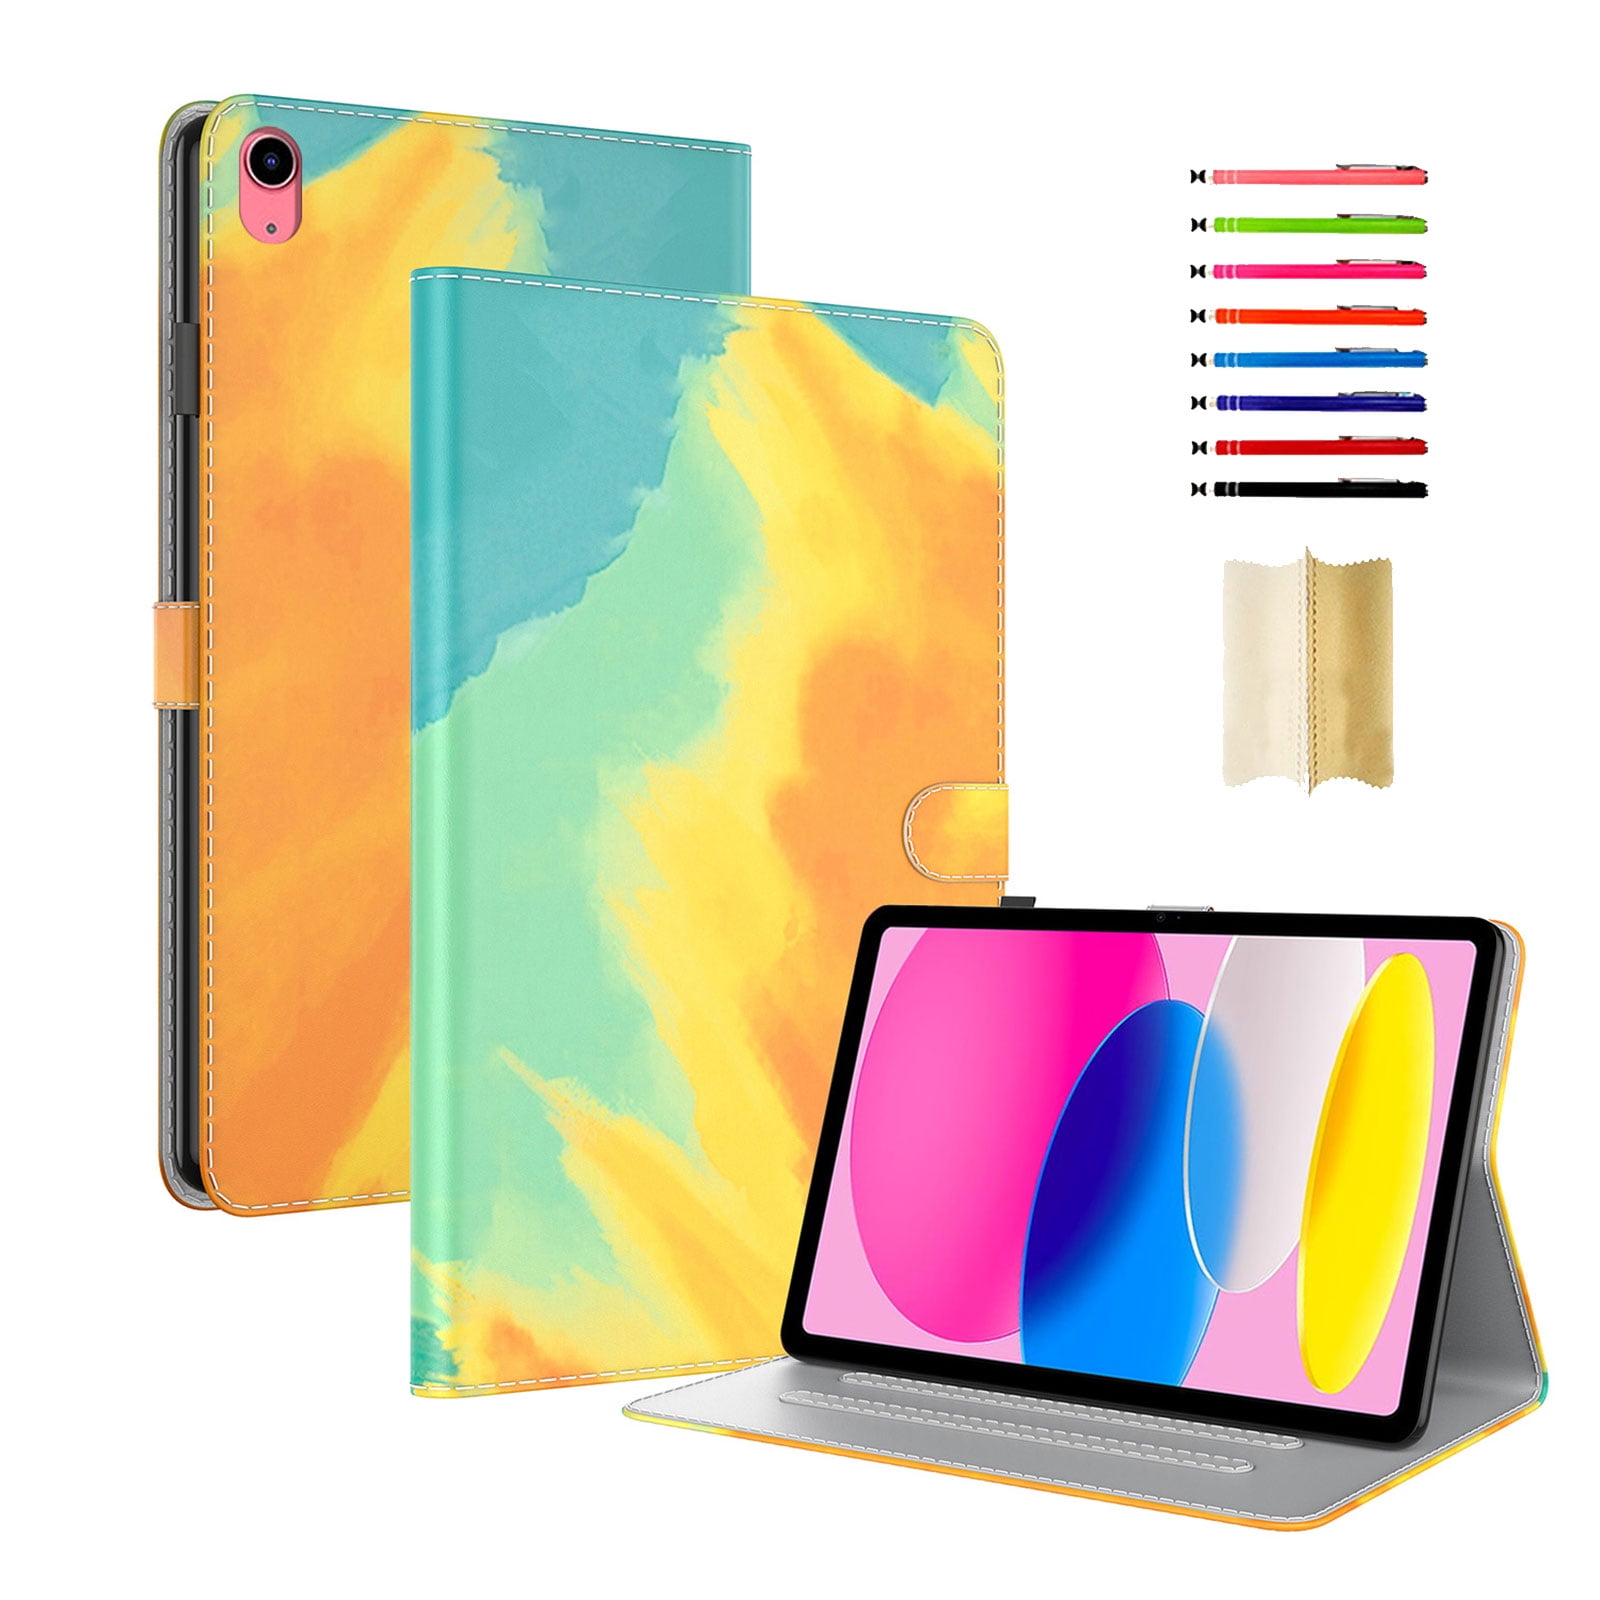  Vimorco iPad 10th Generation Case, iPad Case 10th Generation  with Pencil Holder/Hand Strap/Pocket, iPad Cover 10th Generation Adjustable  Angle,10th Gen iPad Case 10.9 Inch 2022, Elephant : Electronics